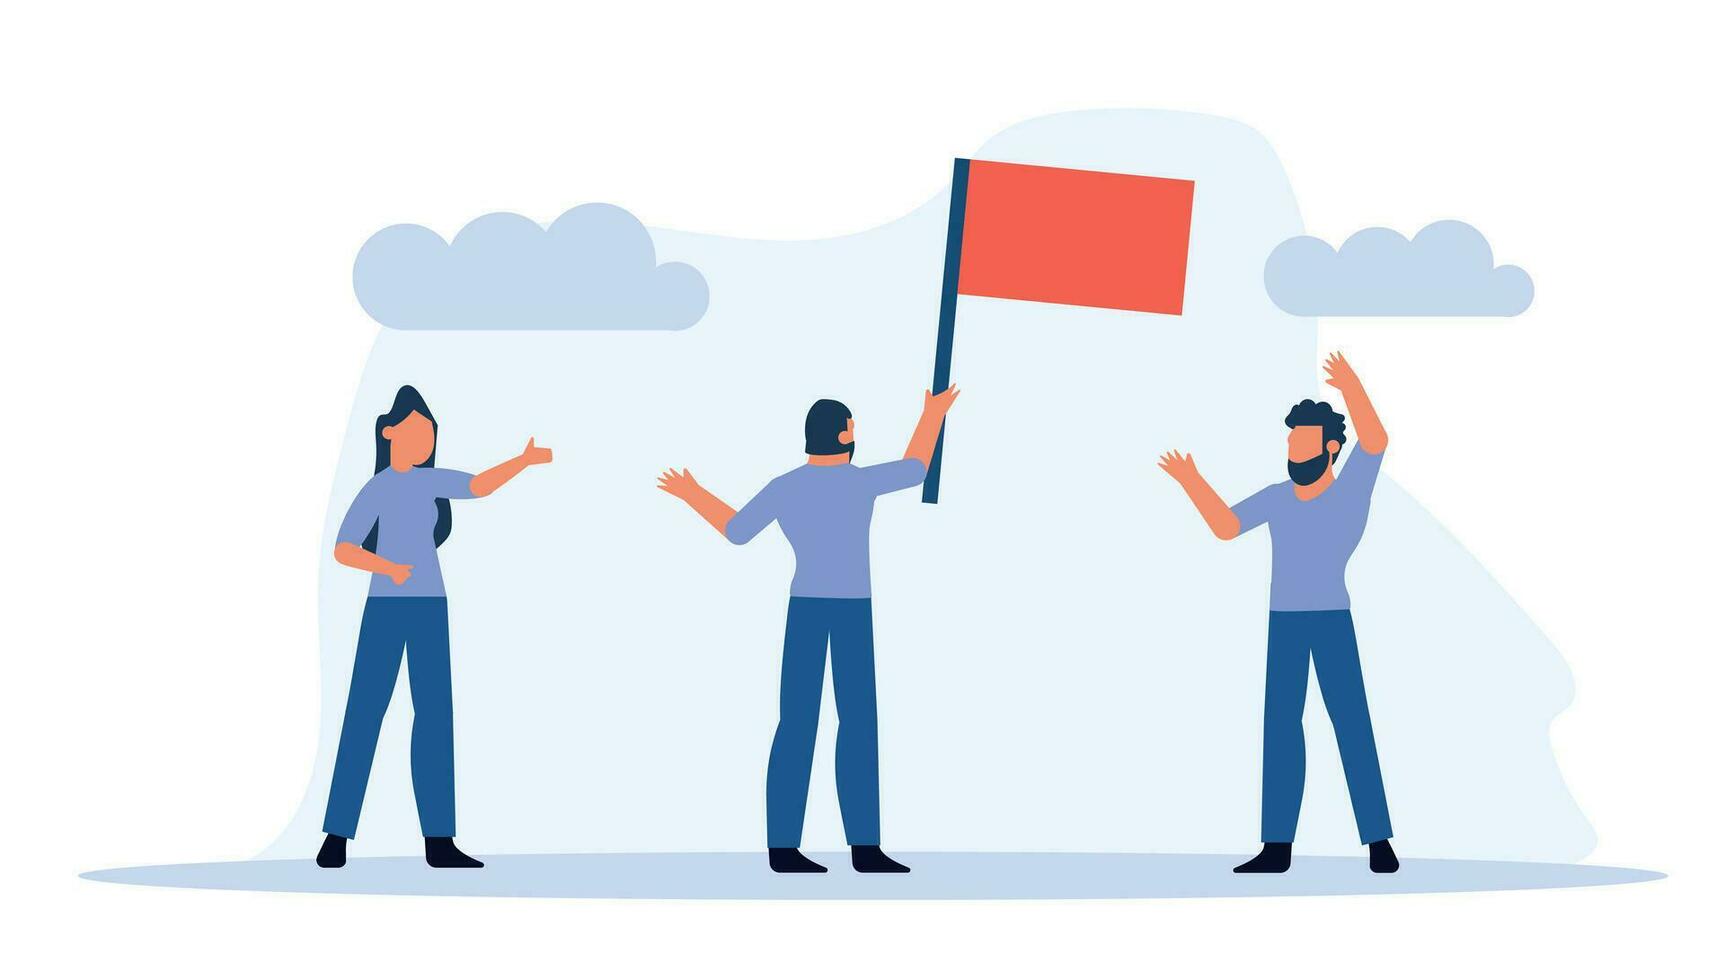 Group people standing together, waving red flag and giving thumbs up. Red flag is symbol of unity and solidarity,  convey a sense of optimism and determination. Vector illustration